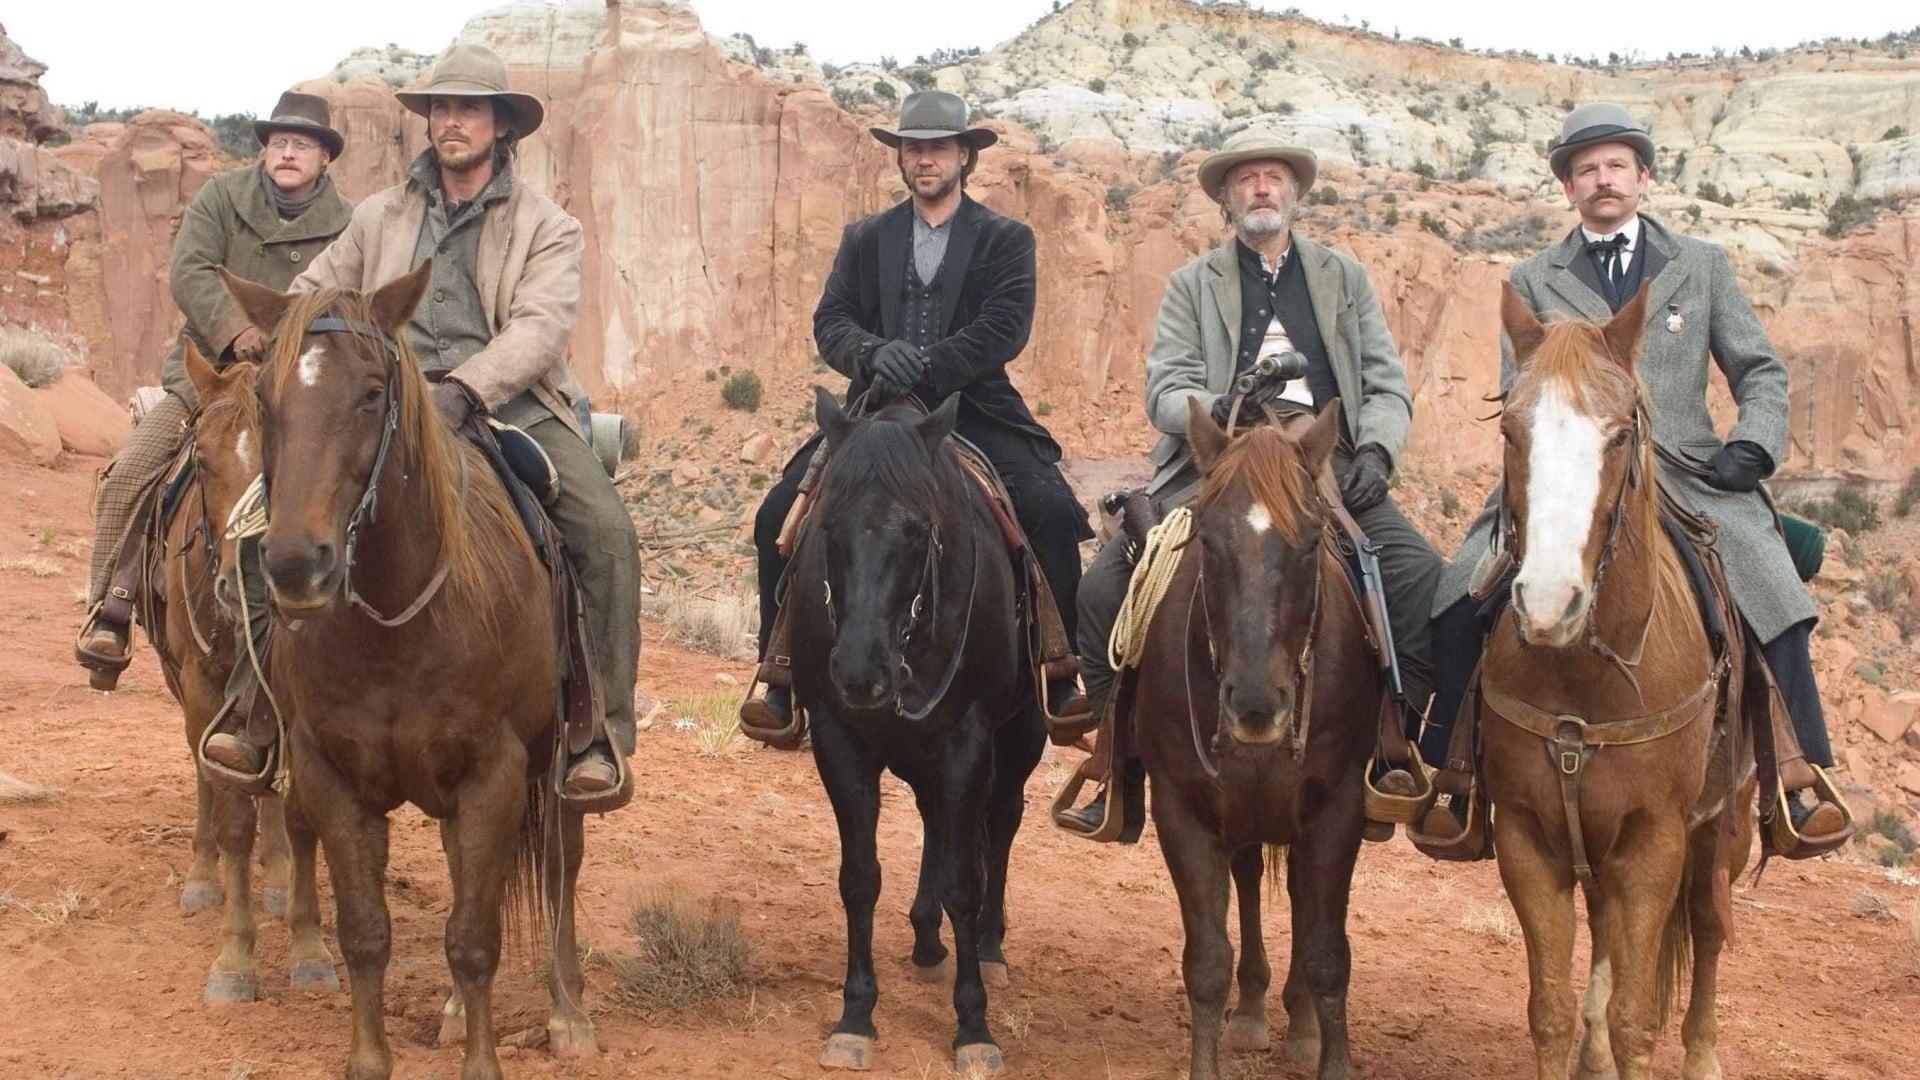 Backdrop Image for 3:10 to Yuma